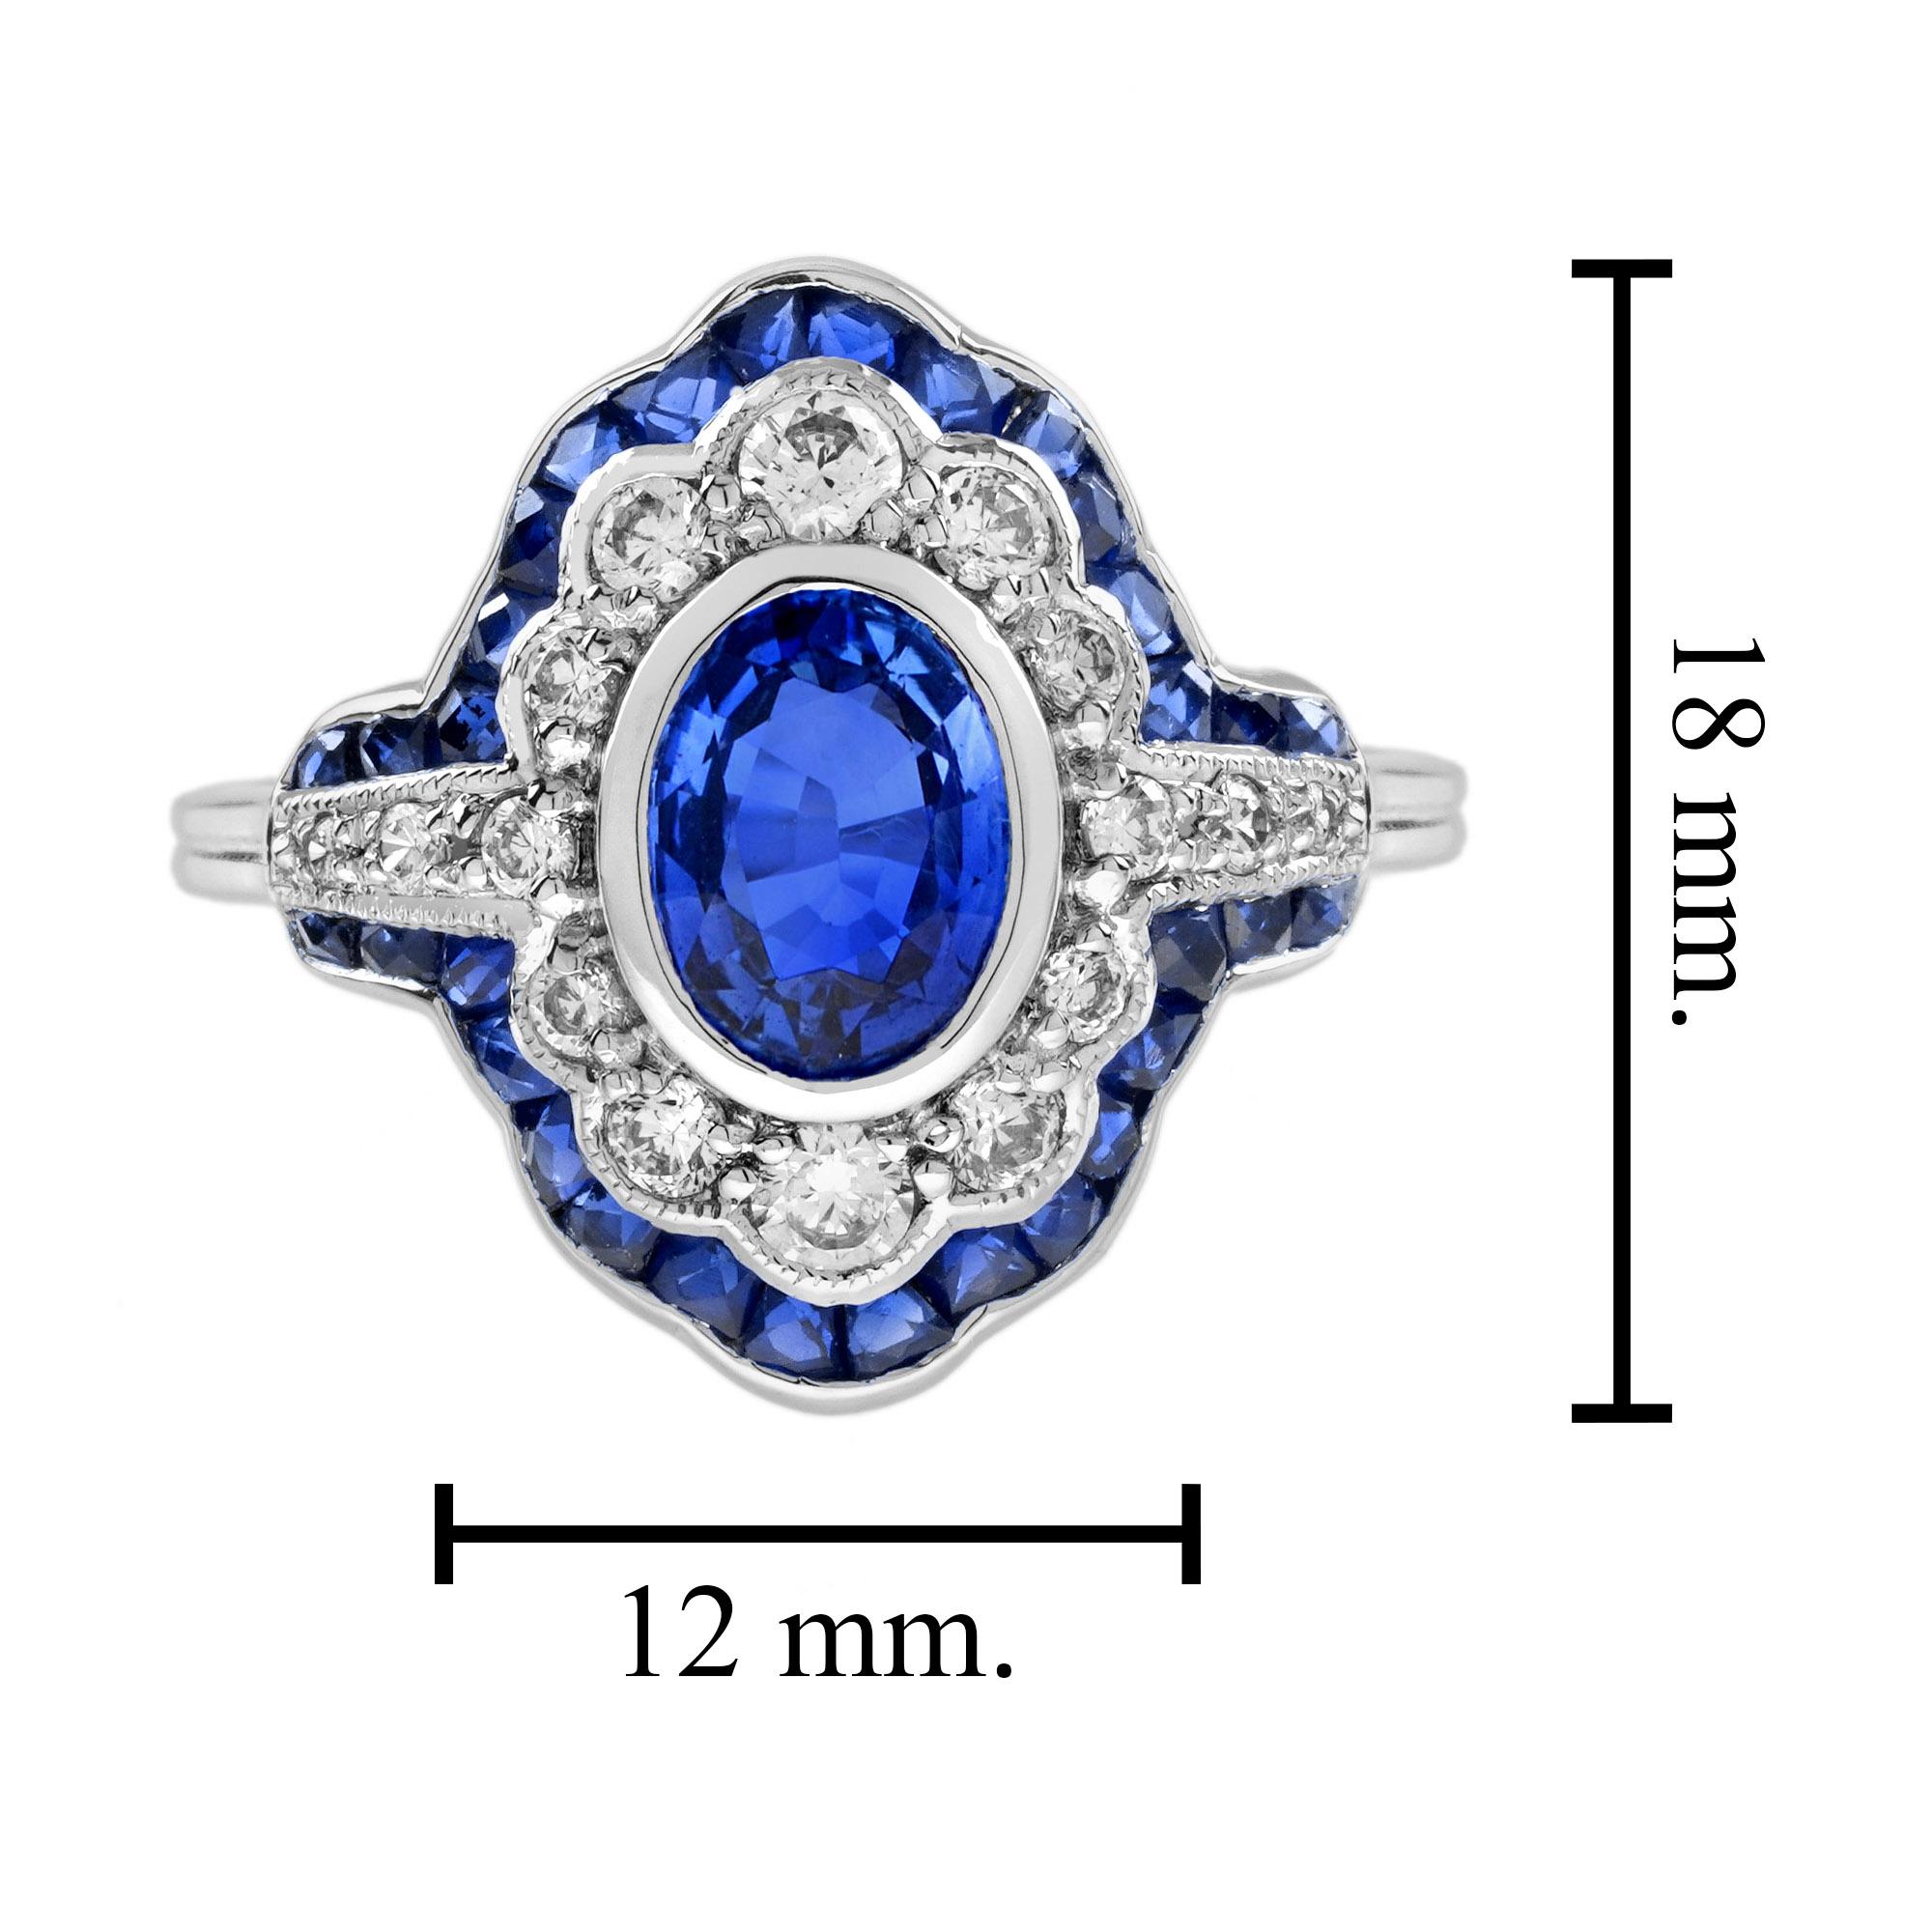 1.6 Ct. Ceylon Sapphire Diamond Art Deco Style Engagement Ring in 18K White Gold For Sale 2